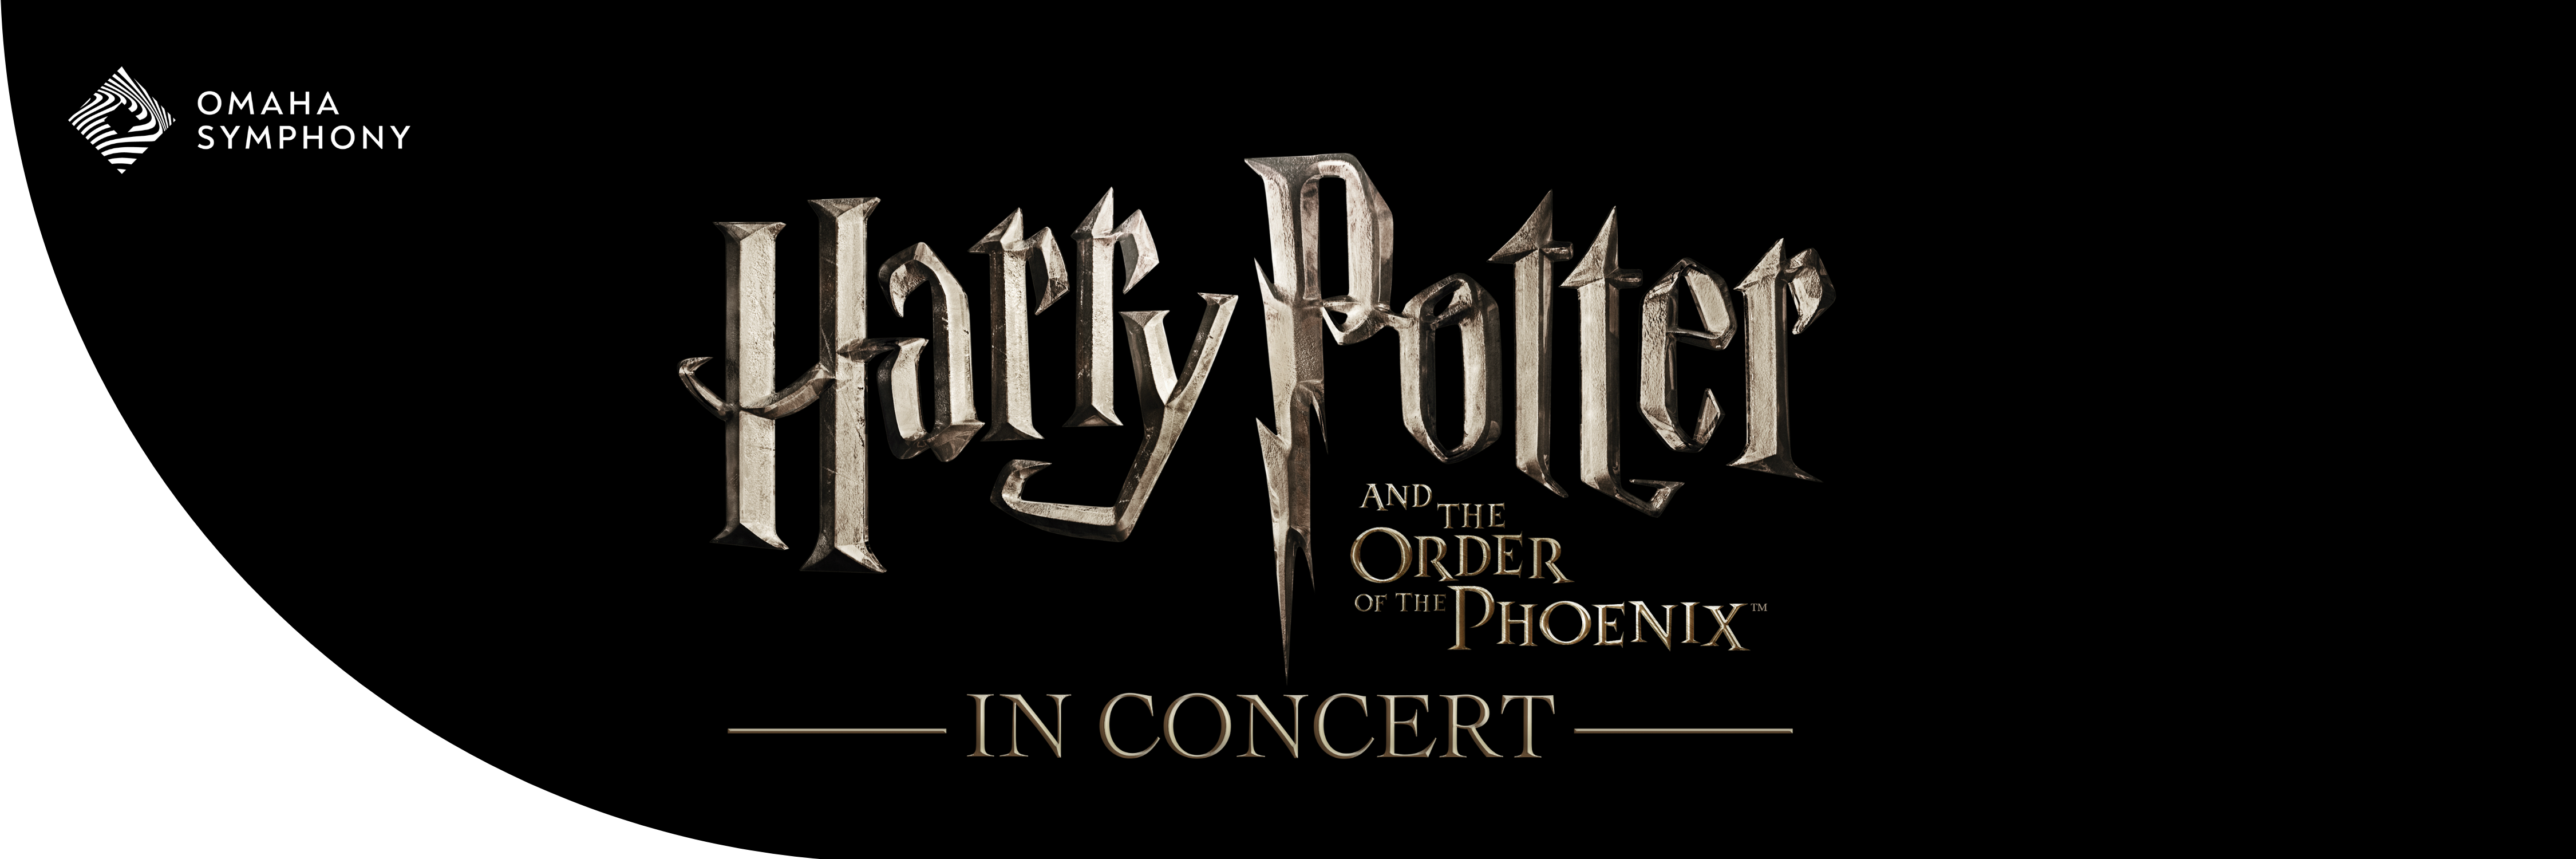 Harry P otter and the Order of the Phoenix in Concert - Presented by the Omaha Symphony